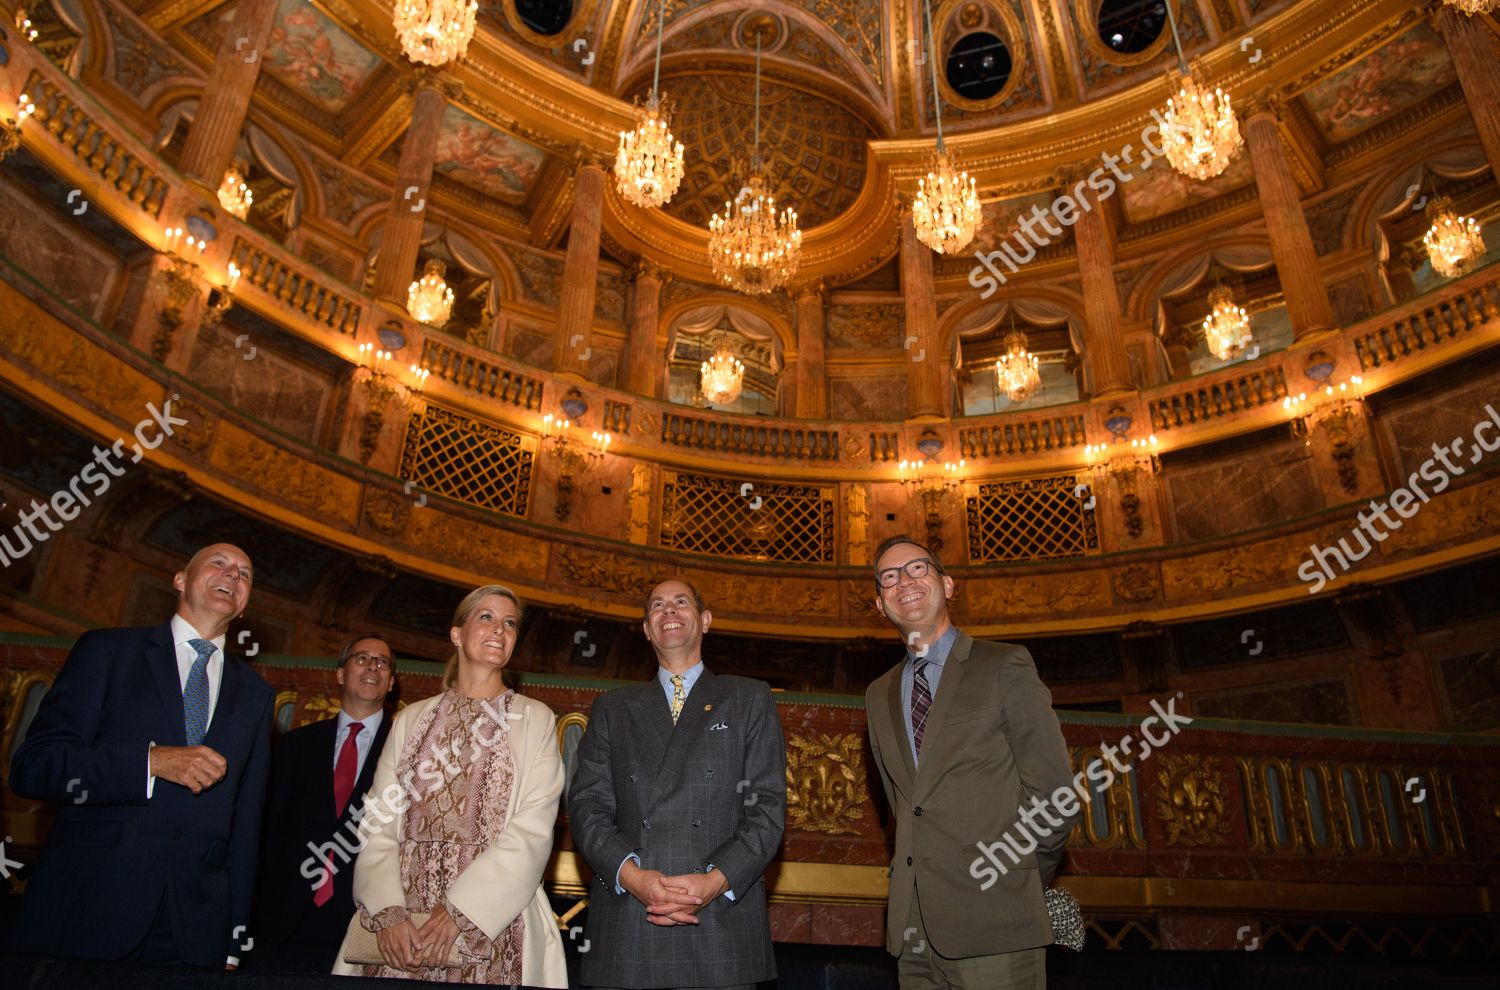 prince-edward-and-sophie-countess-of-wessex-visit-to-france-shutterstock-editorial-9907868bo.jpg